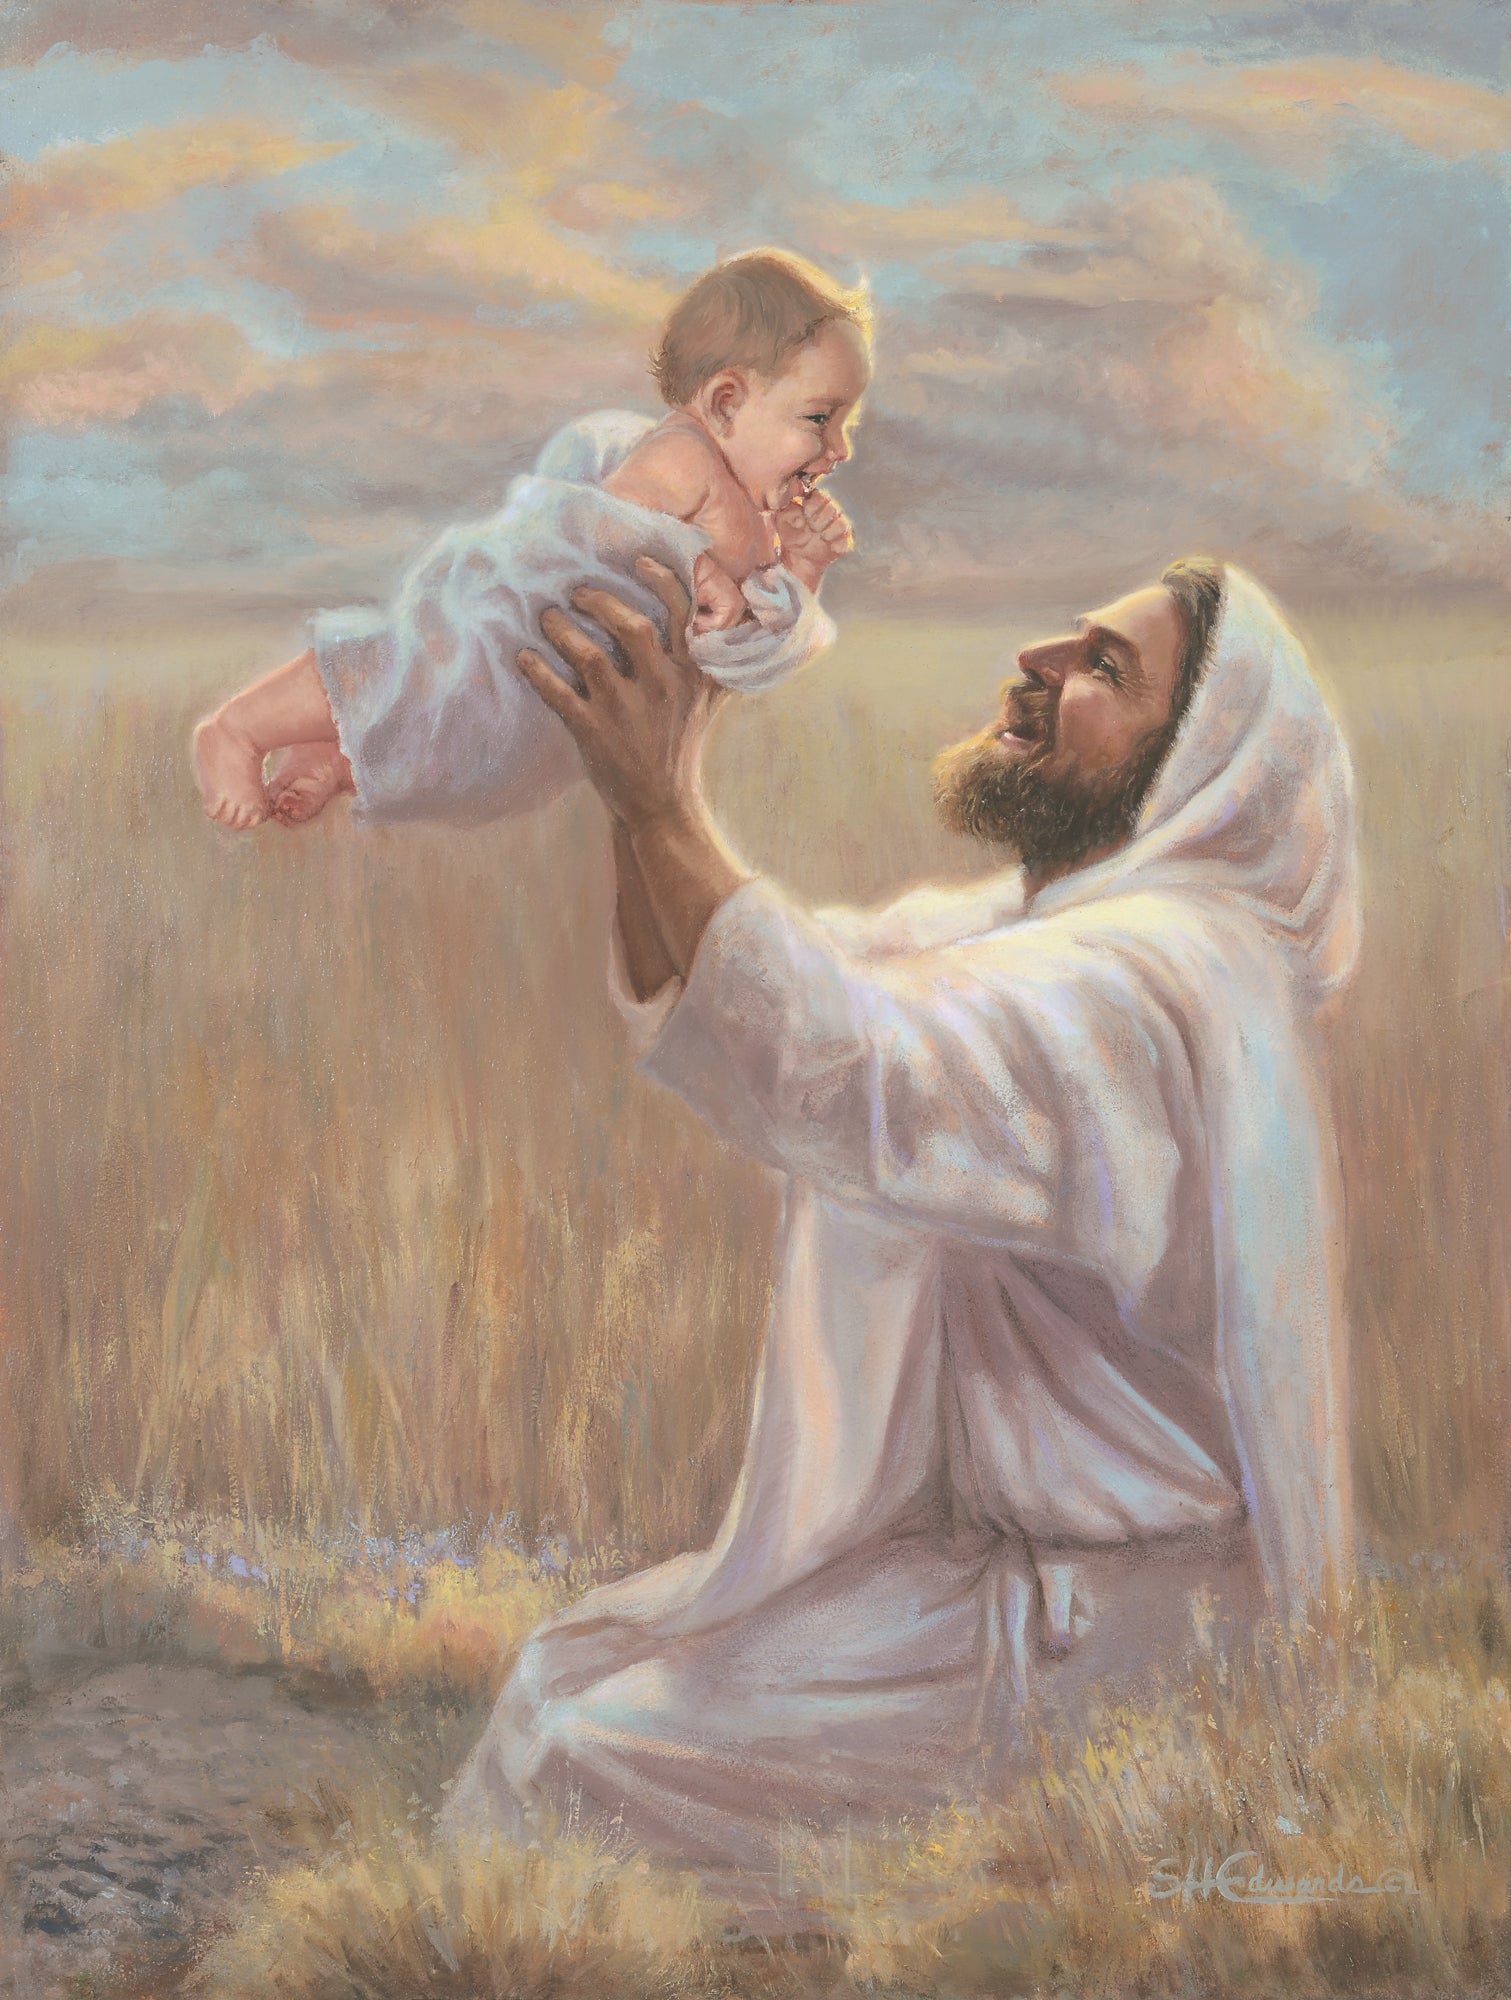 Jesus kneeling in a wheat field holding up a baby. 